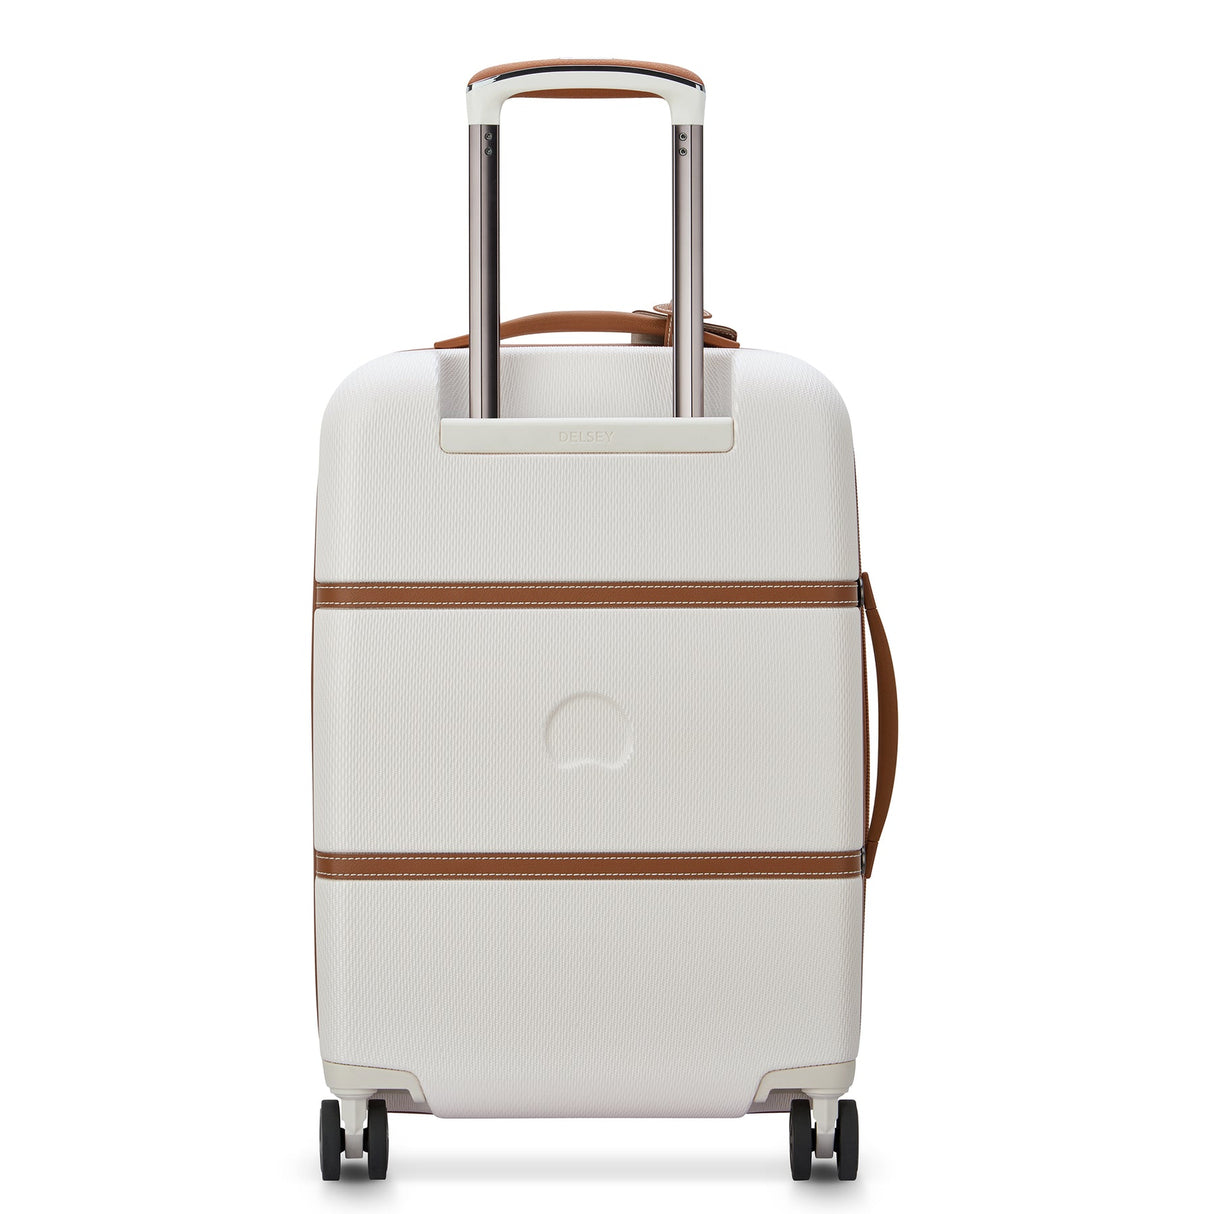 Delsey Chatelet Air 2.0 Carry-On Spinner , , delsey-chatelet-air-2.0-40167680515-12_1800x1800_8aa5e4db-e15e-4134-87a2-15fe0b6fdefc